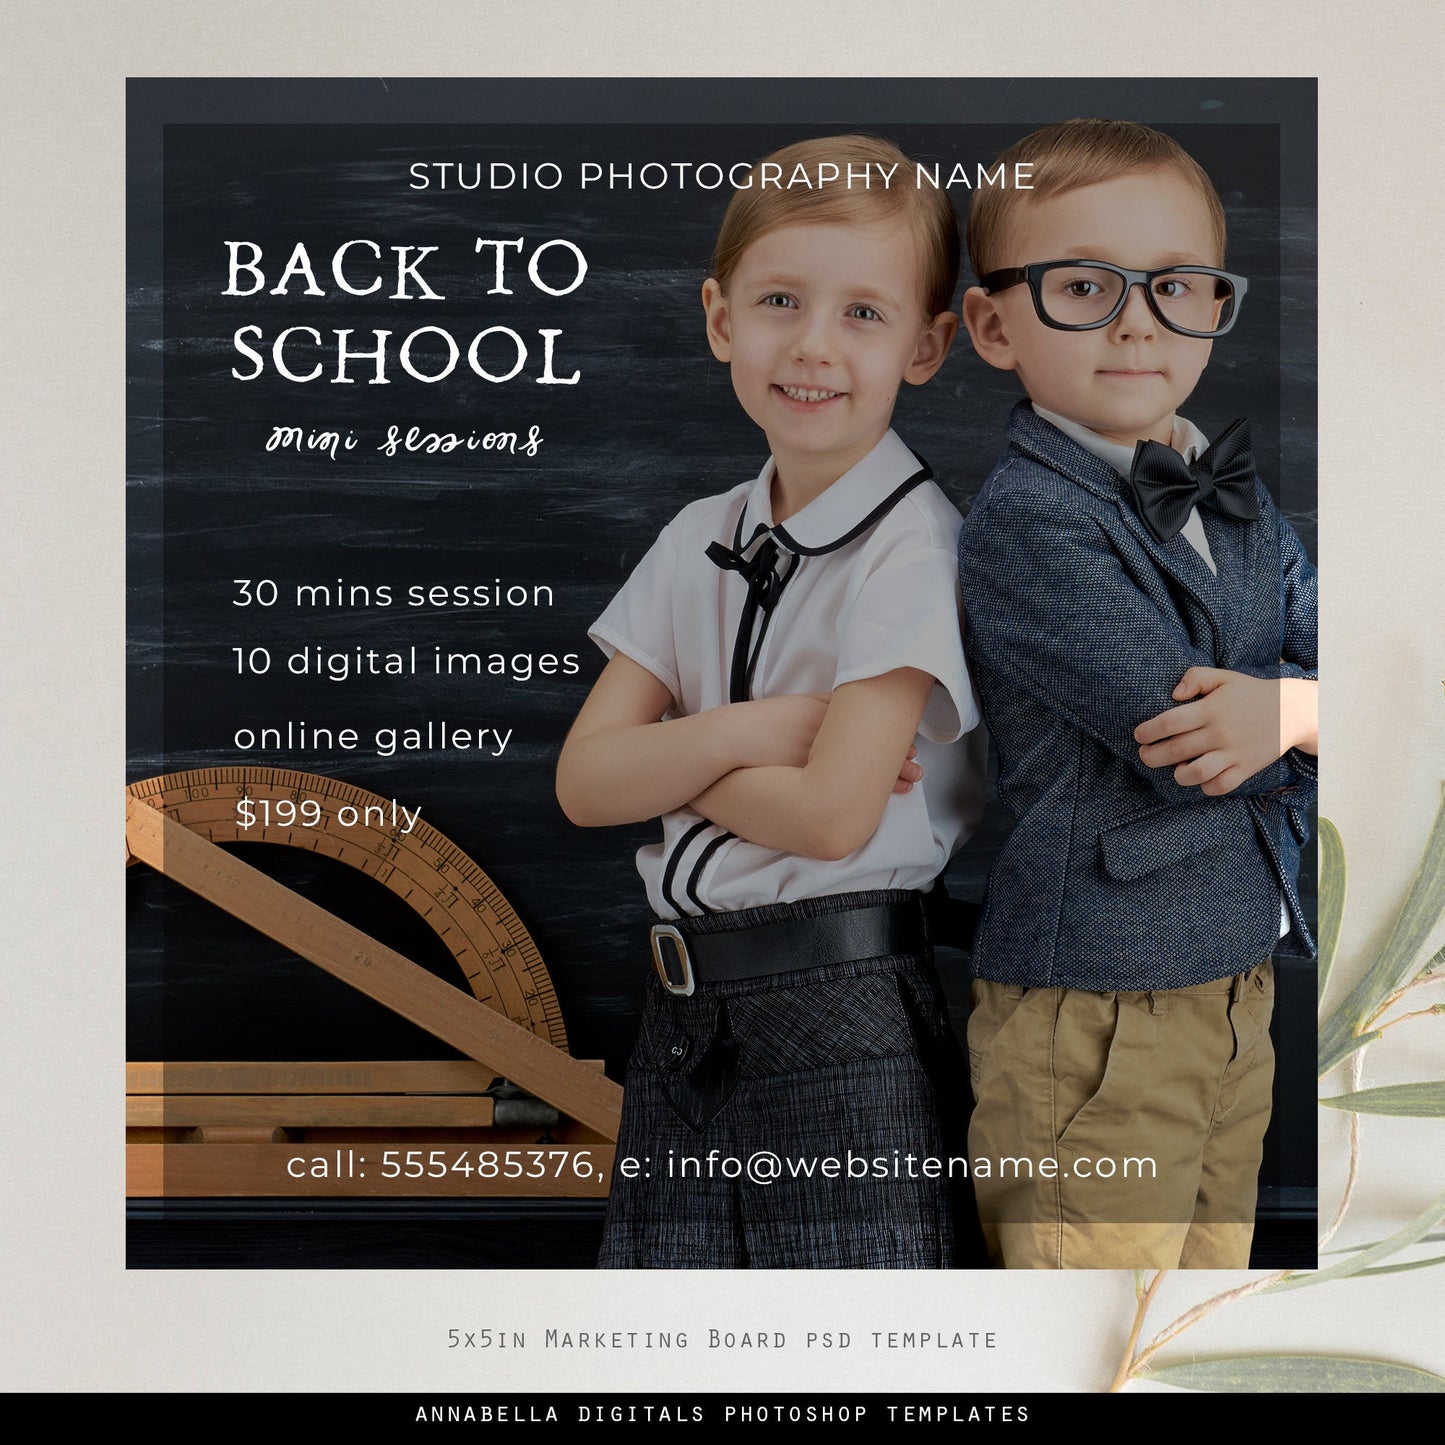 Back to School Mini Session Template